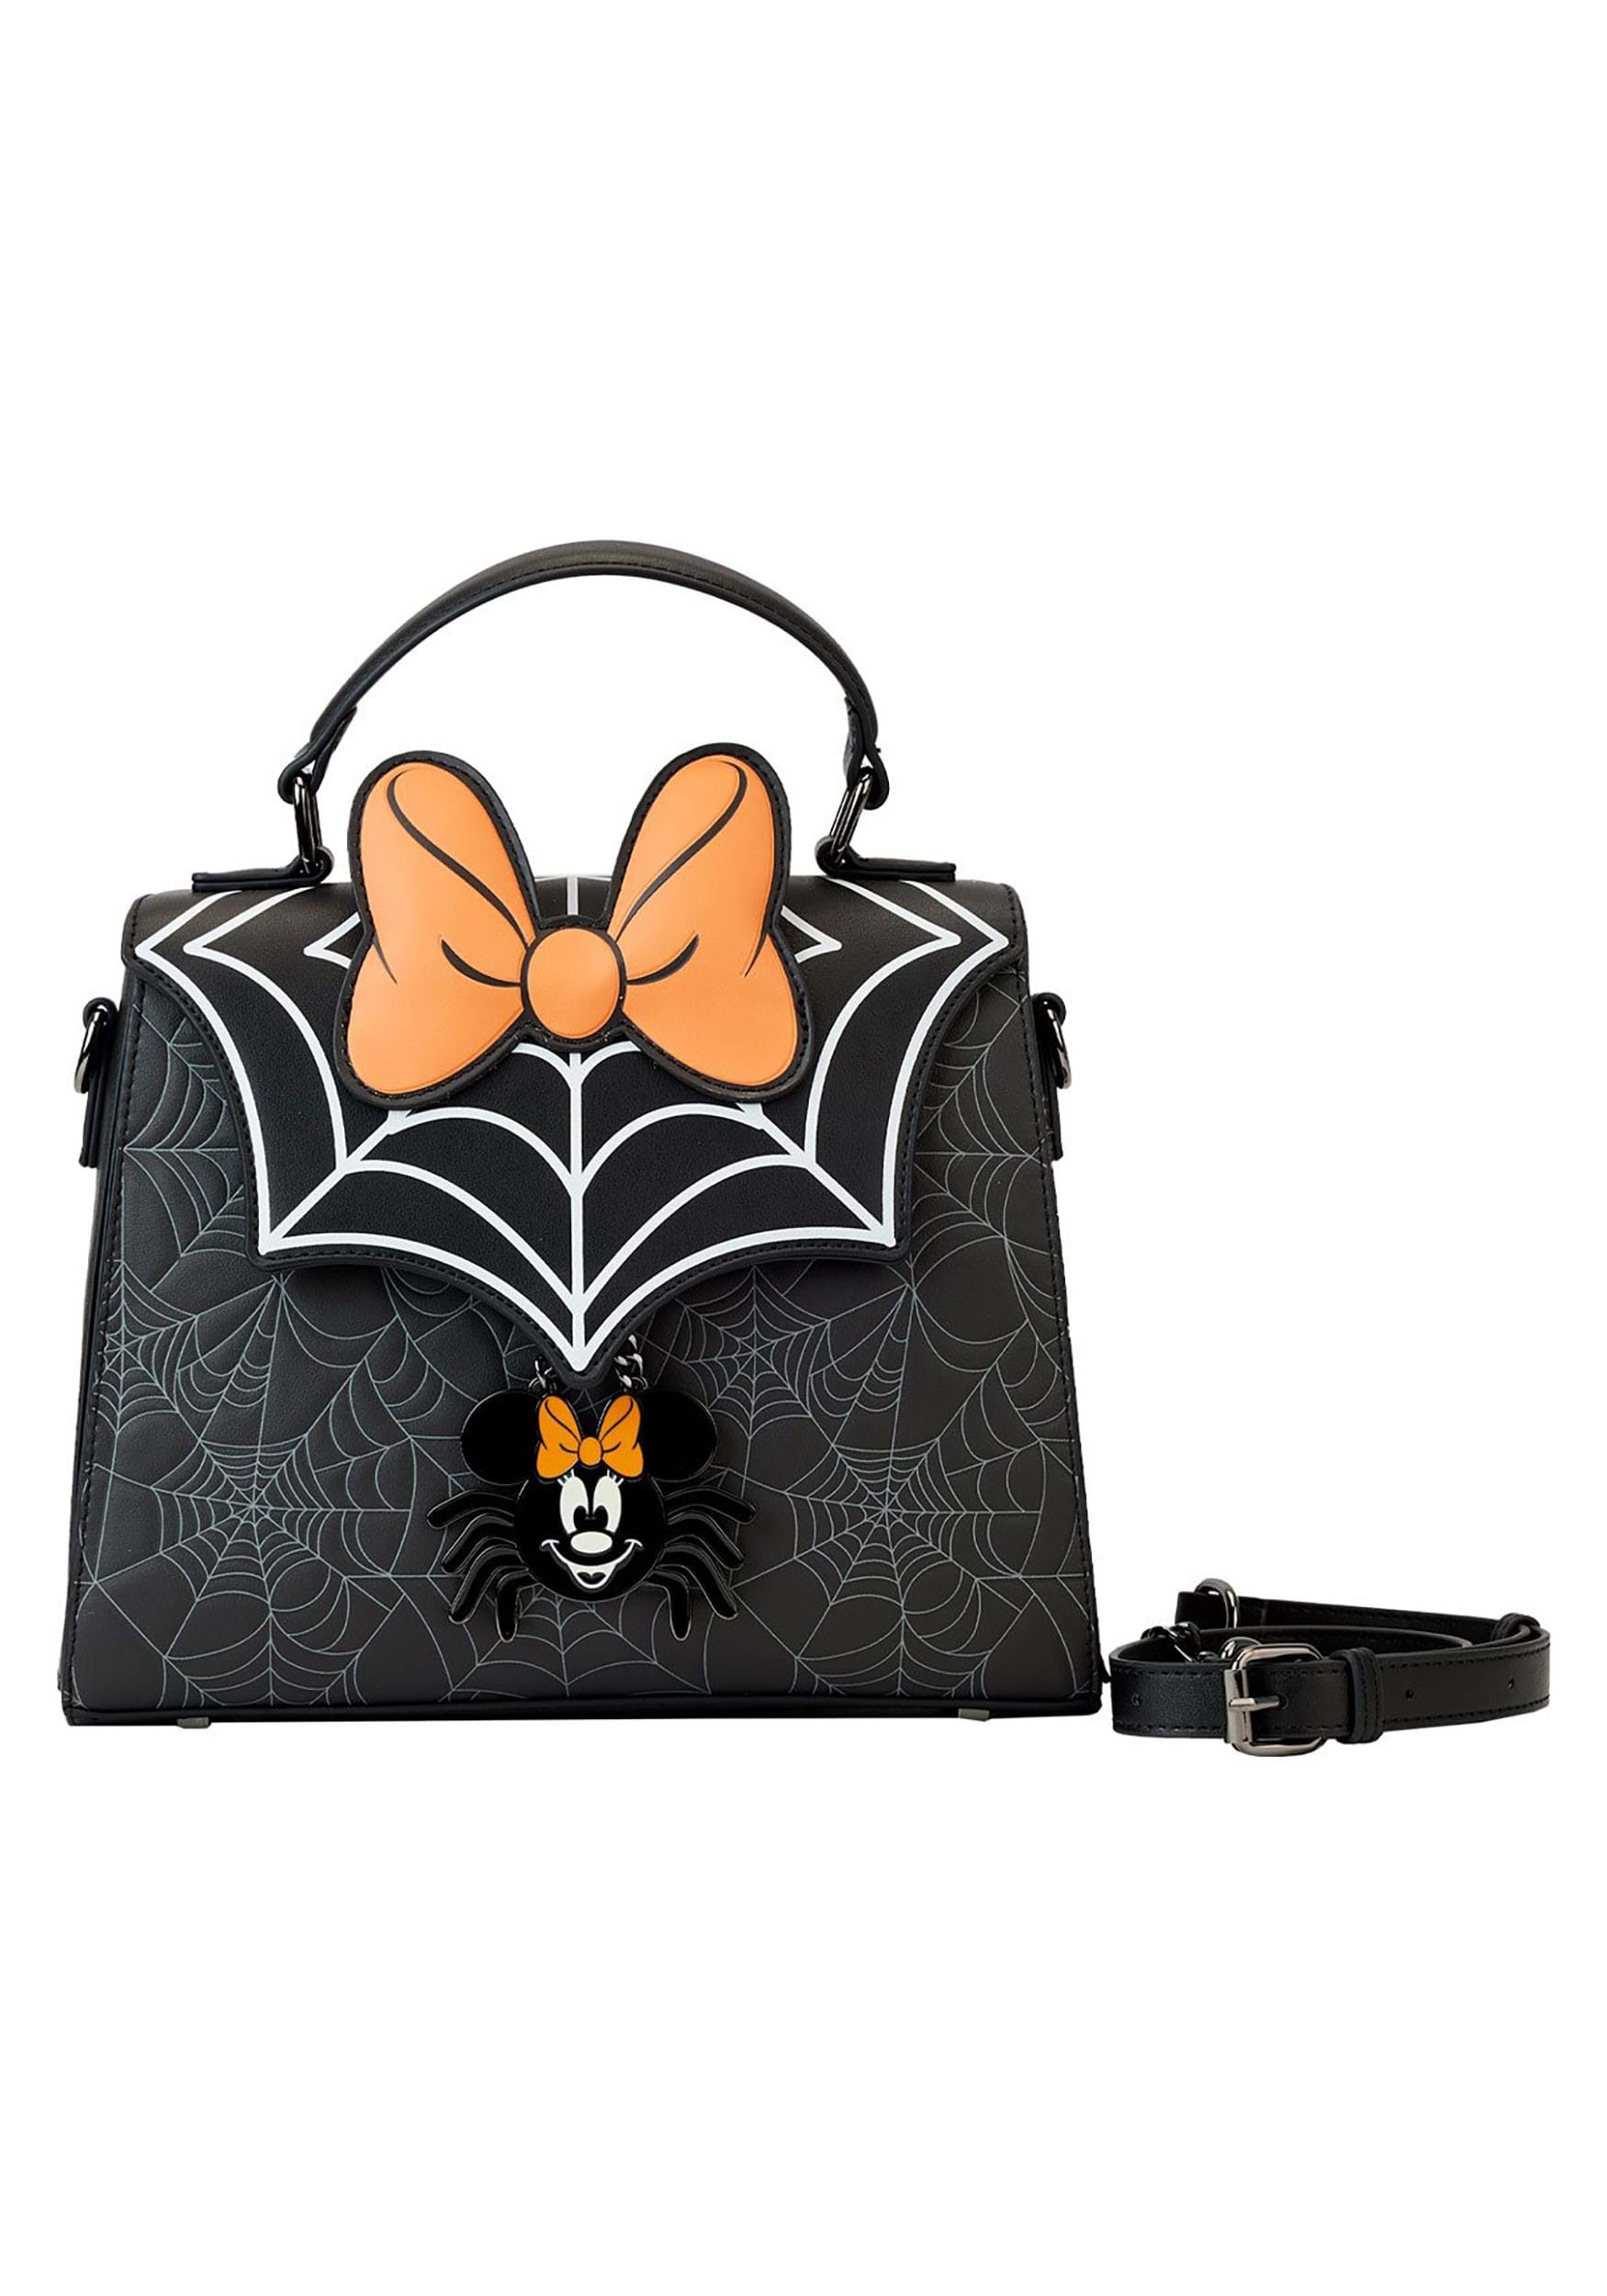 Image of Loungefly Disney Minnie Mouse Spider Crossbody Purse | Halloween Bags ID LFWDTB2841-ST